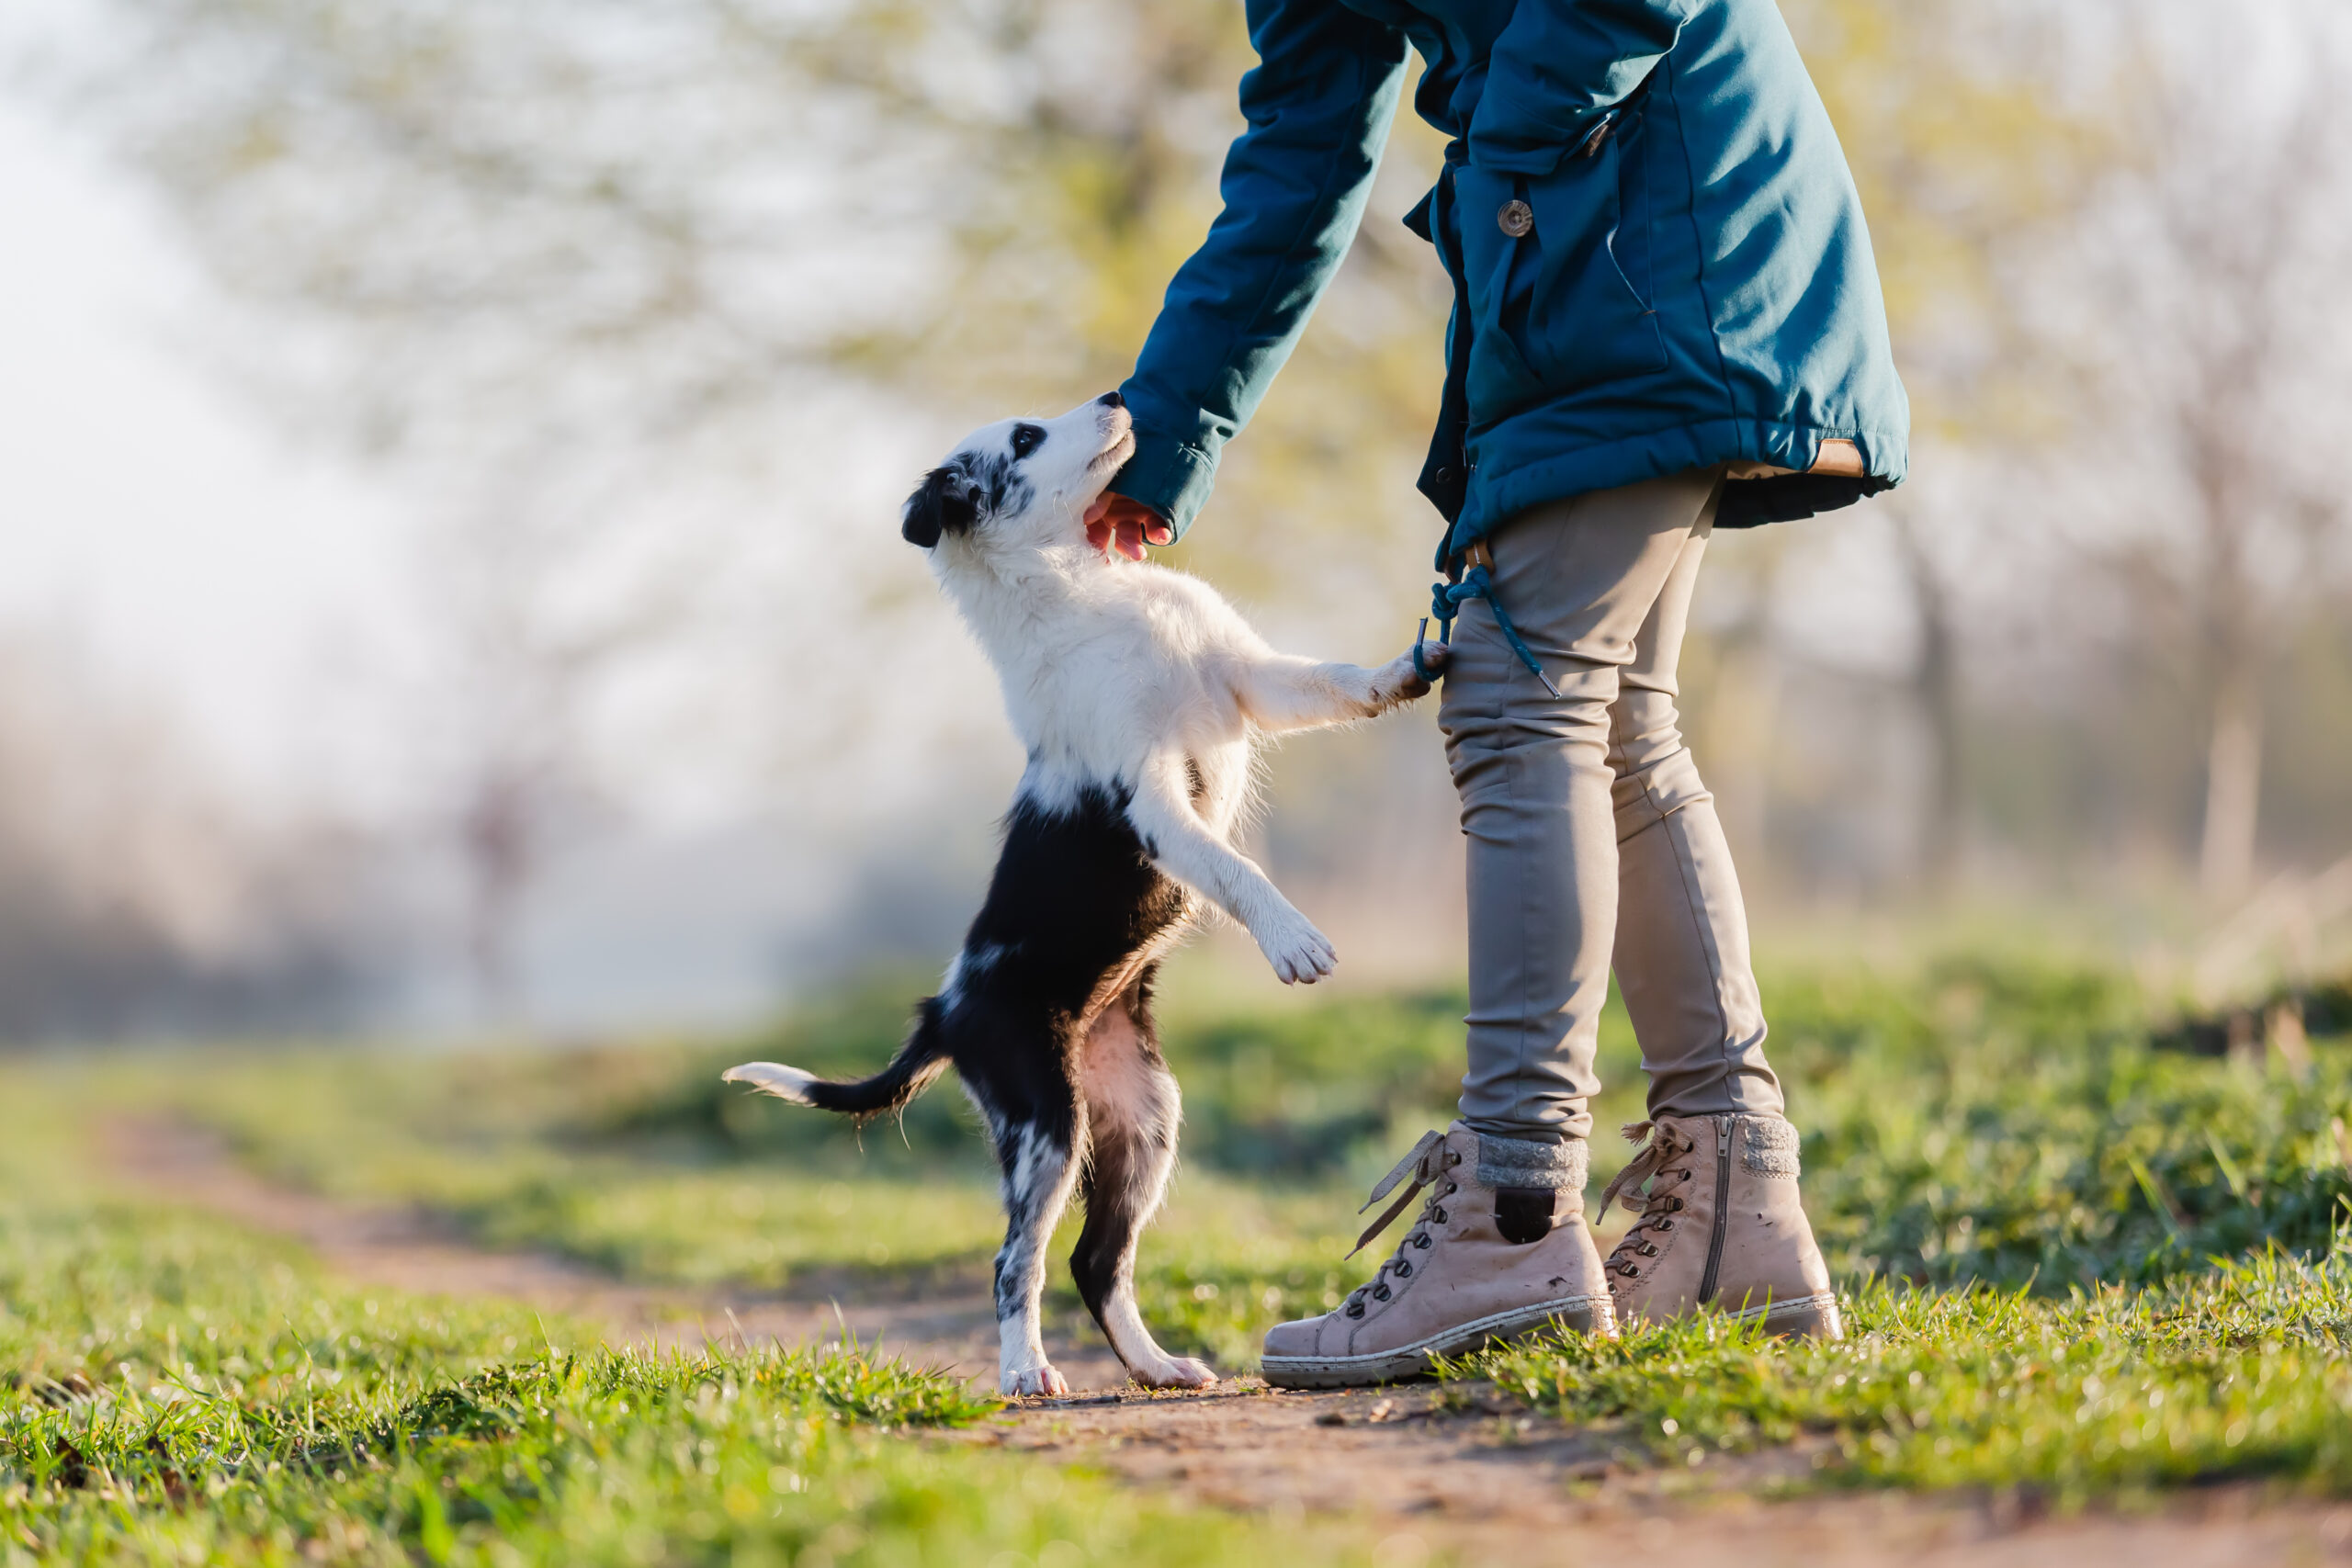 Jumping on strangers is a common behavior problem in dogs, but with consistent training, you can help your dog overcome this behavior.